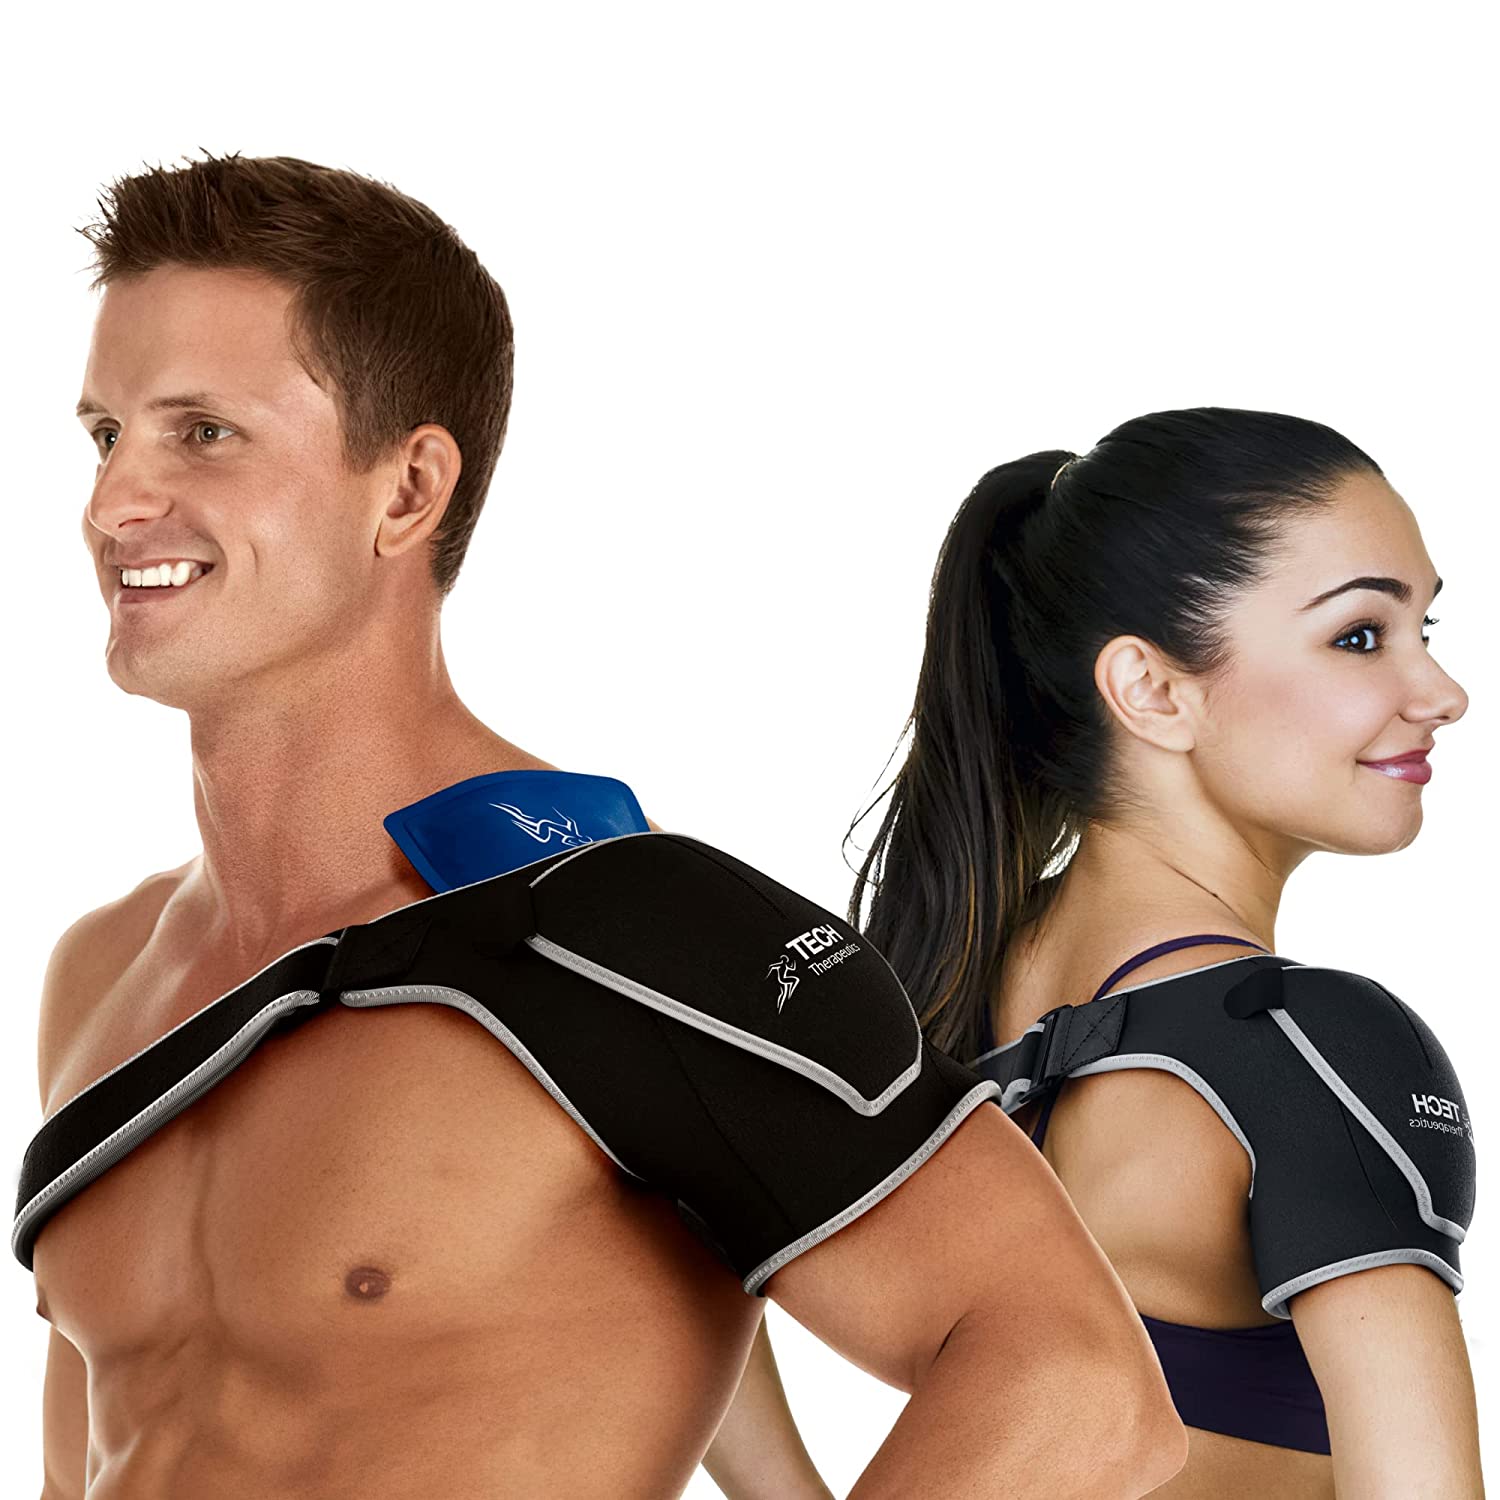 Shoulder Brace [Right and Left] with Cold Hot Gel - Sports Adjustable Shoulder Support and Pain Relief Tech Therapeutics